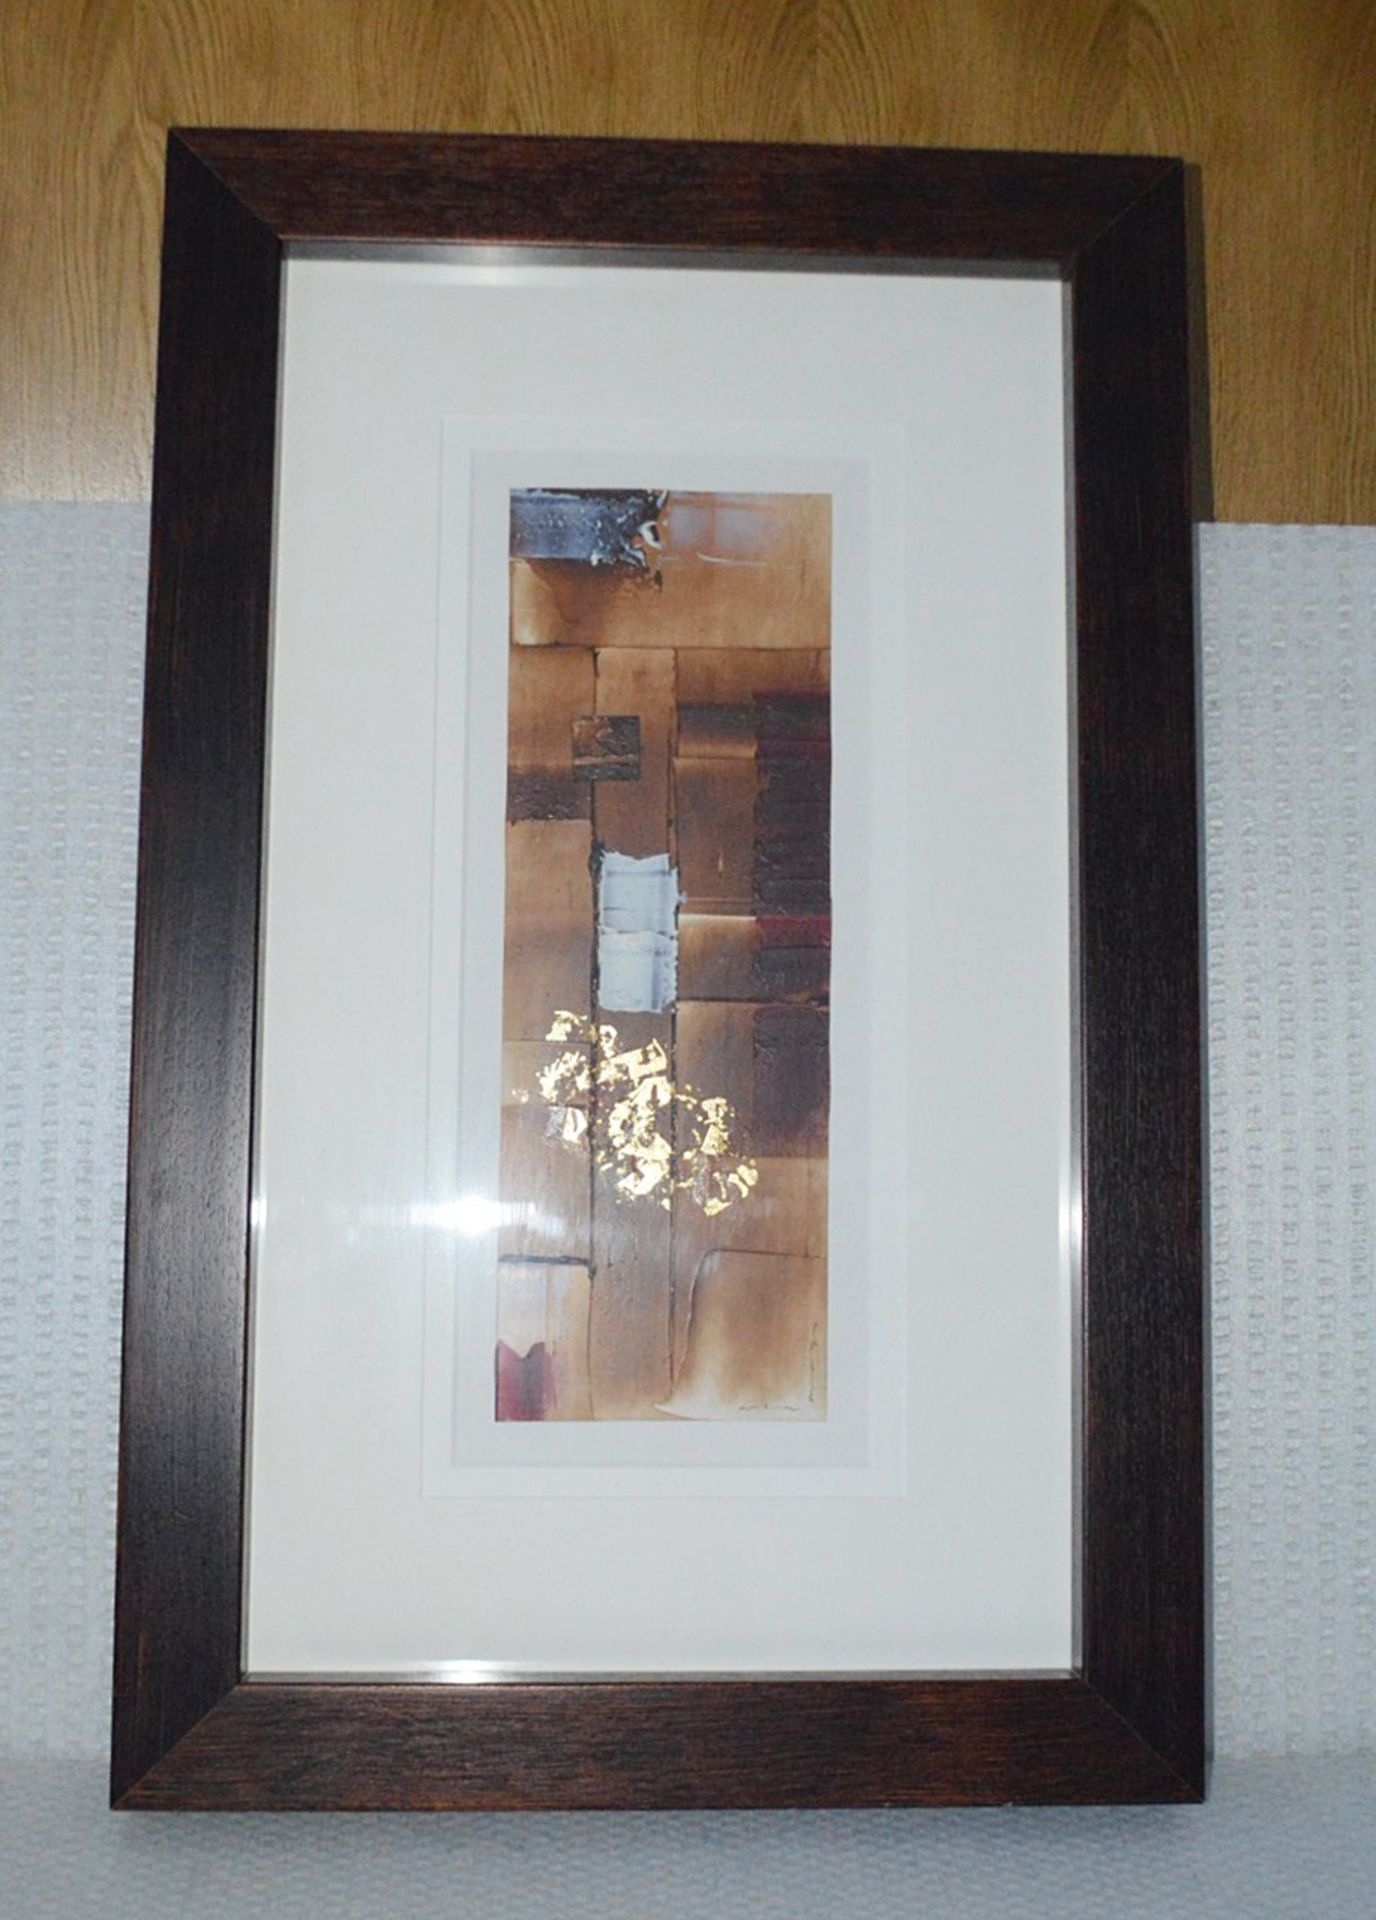 1 x Framed Original Mixed Media Oblong-Shaped Artwork By Orla May In Brown & Gold - Image 2 of 6